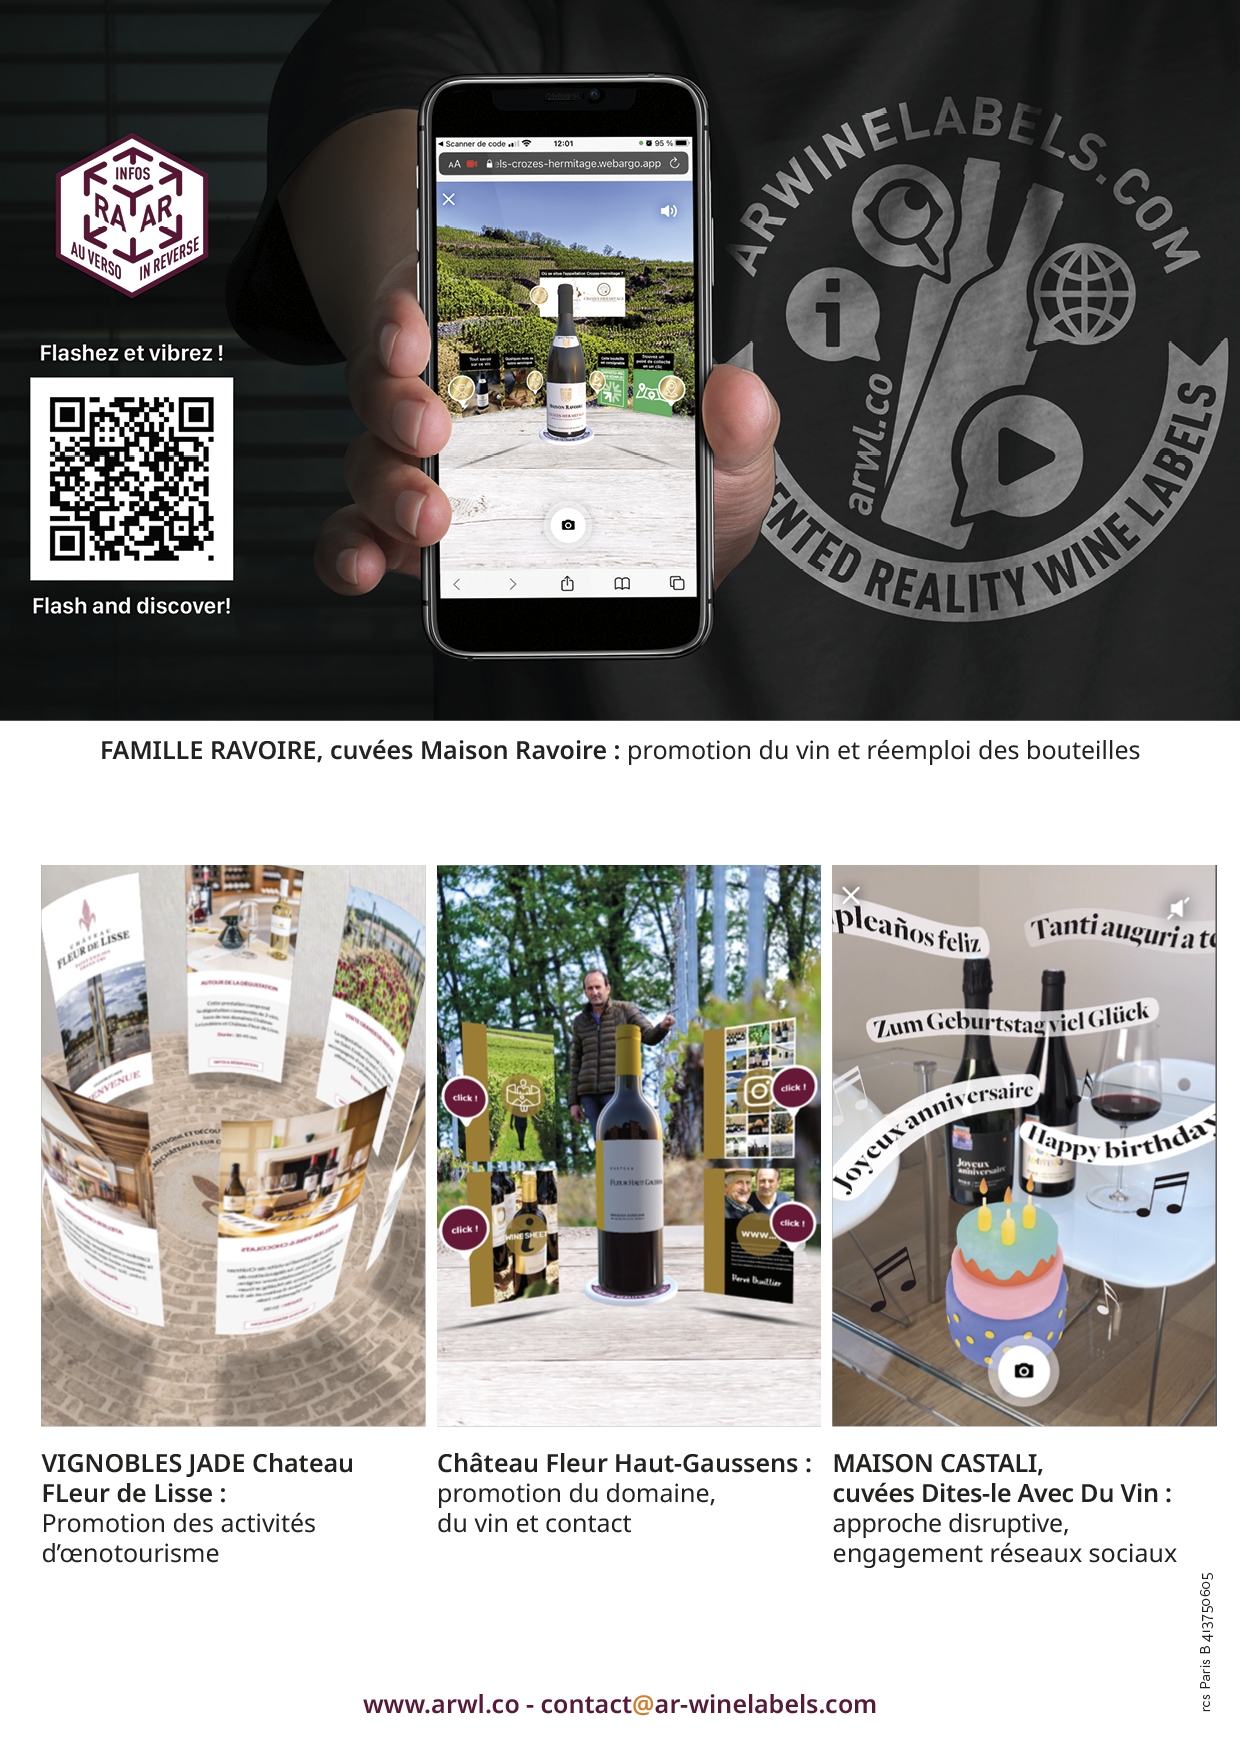 QR code augmented marketing and customer projects accessible via webAR